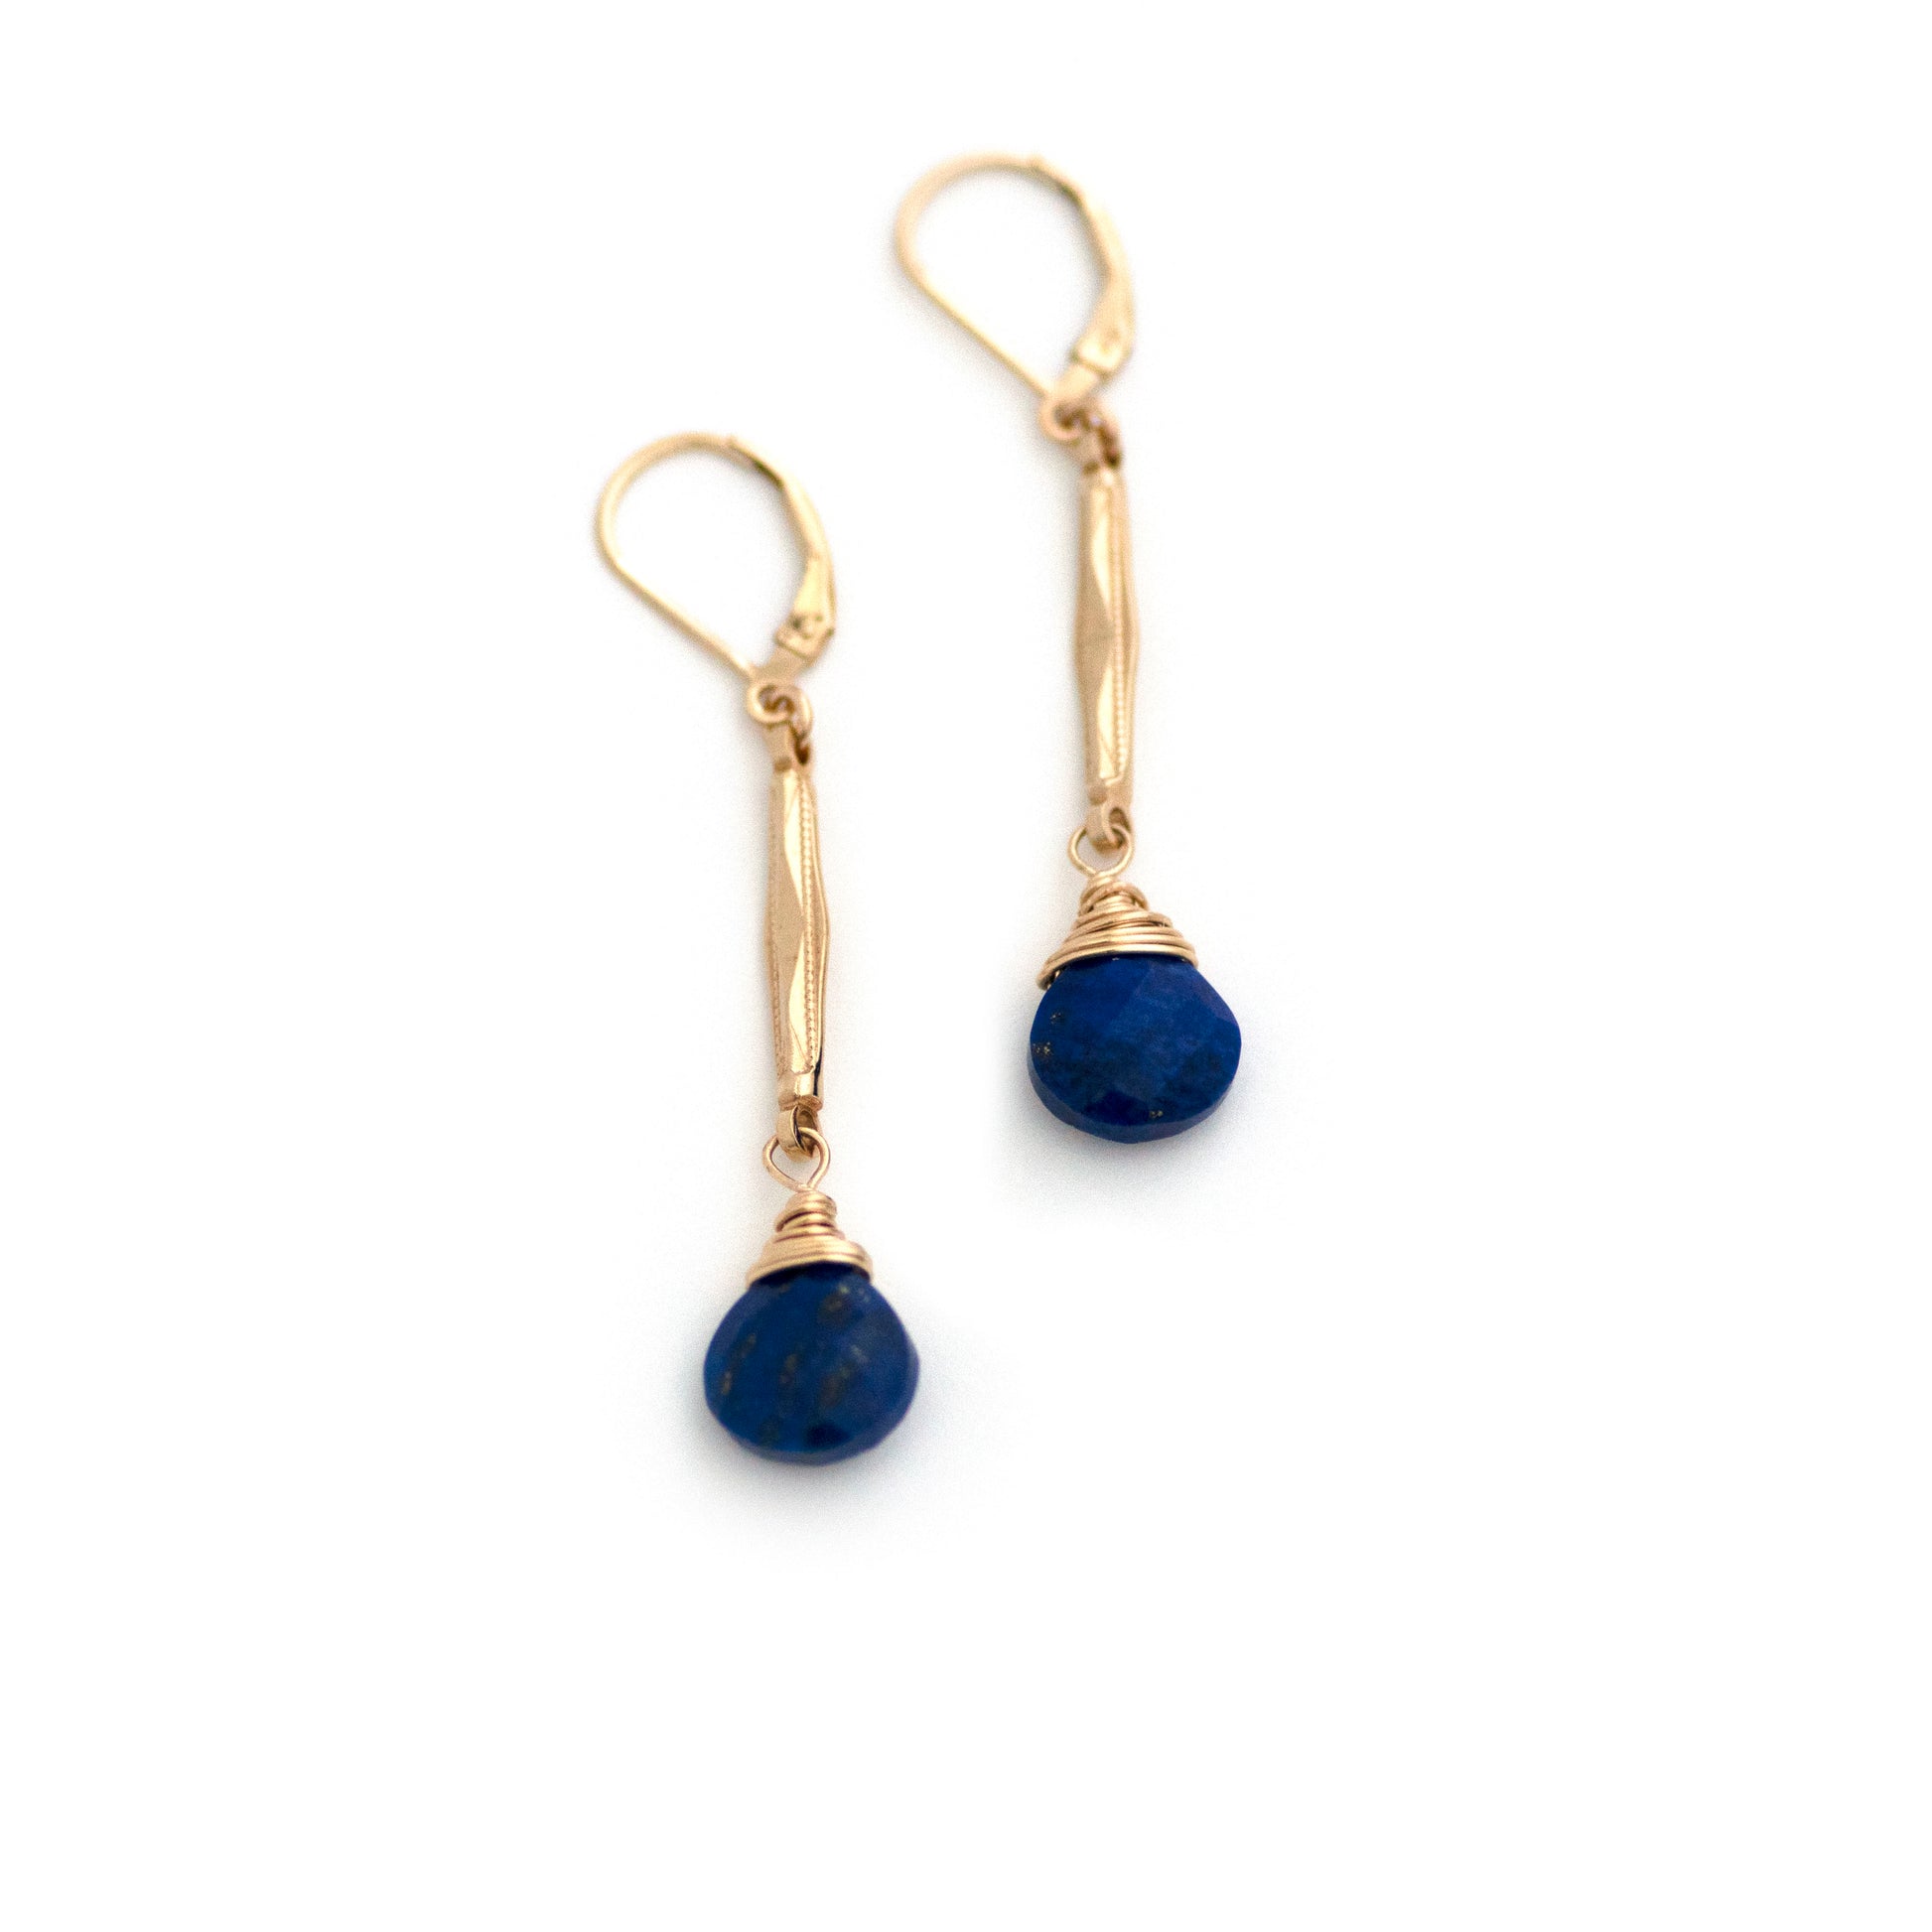 These one-of-a-kind conversion earrings are made up of:  Gold filled antique Edwardian watch chain links from the early 1900s with hand tooled details. Lapis lazuli.